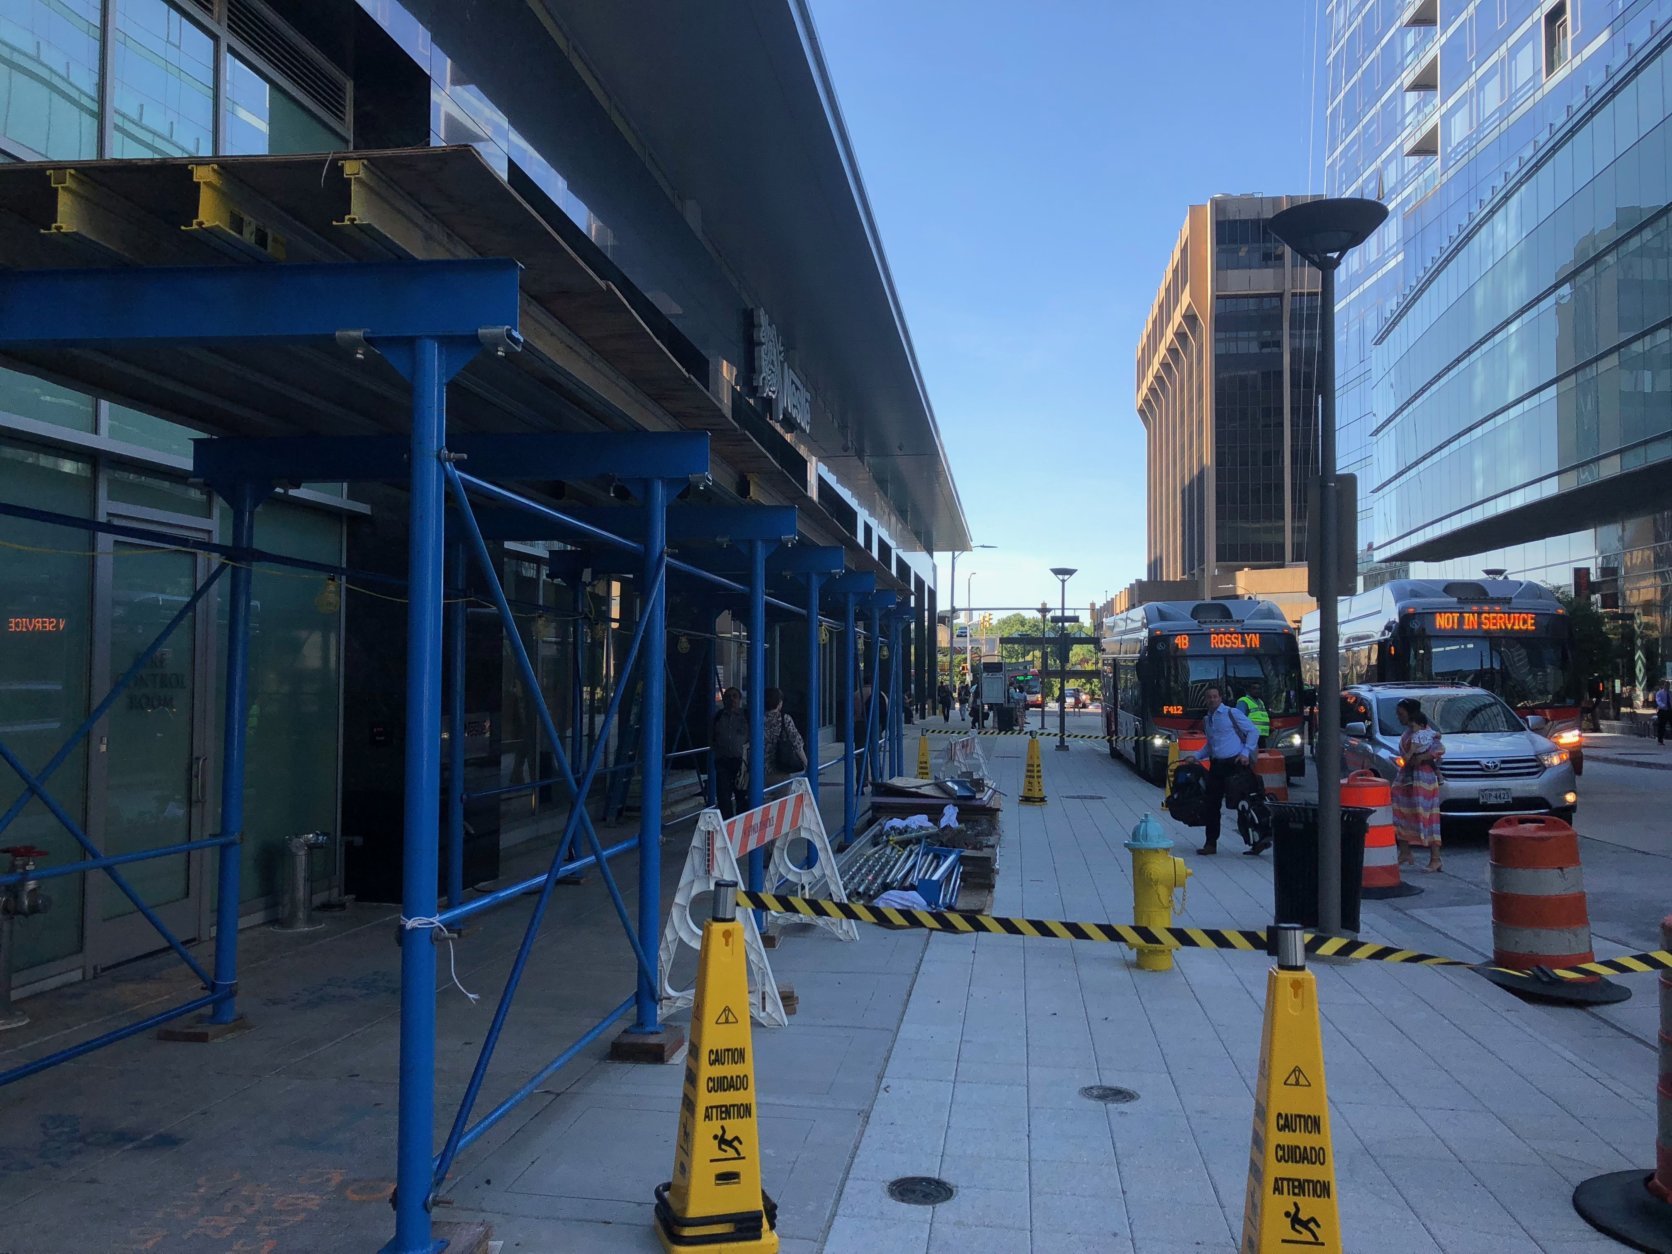 While work on the Metrobus tunnel has finished, other work near the Metro station continues, including under the sign for Nestlé’s new headquarters. (WTOP/Max Smith) 